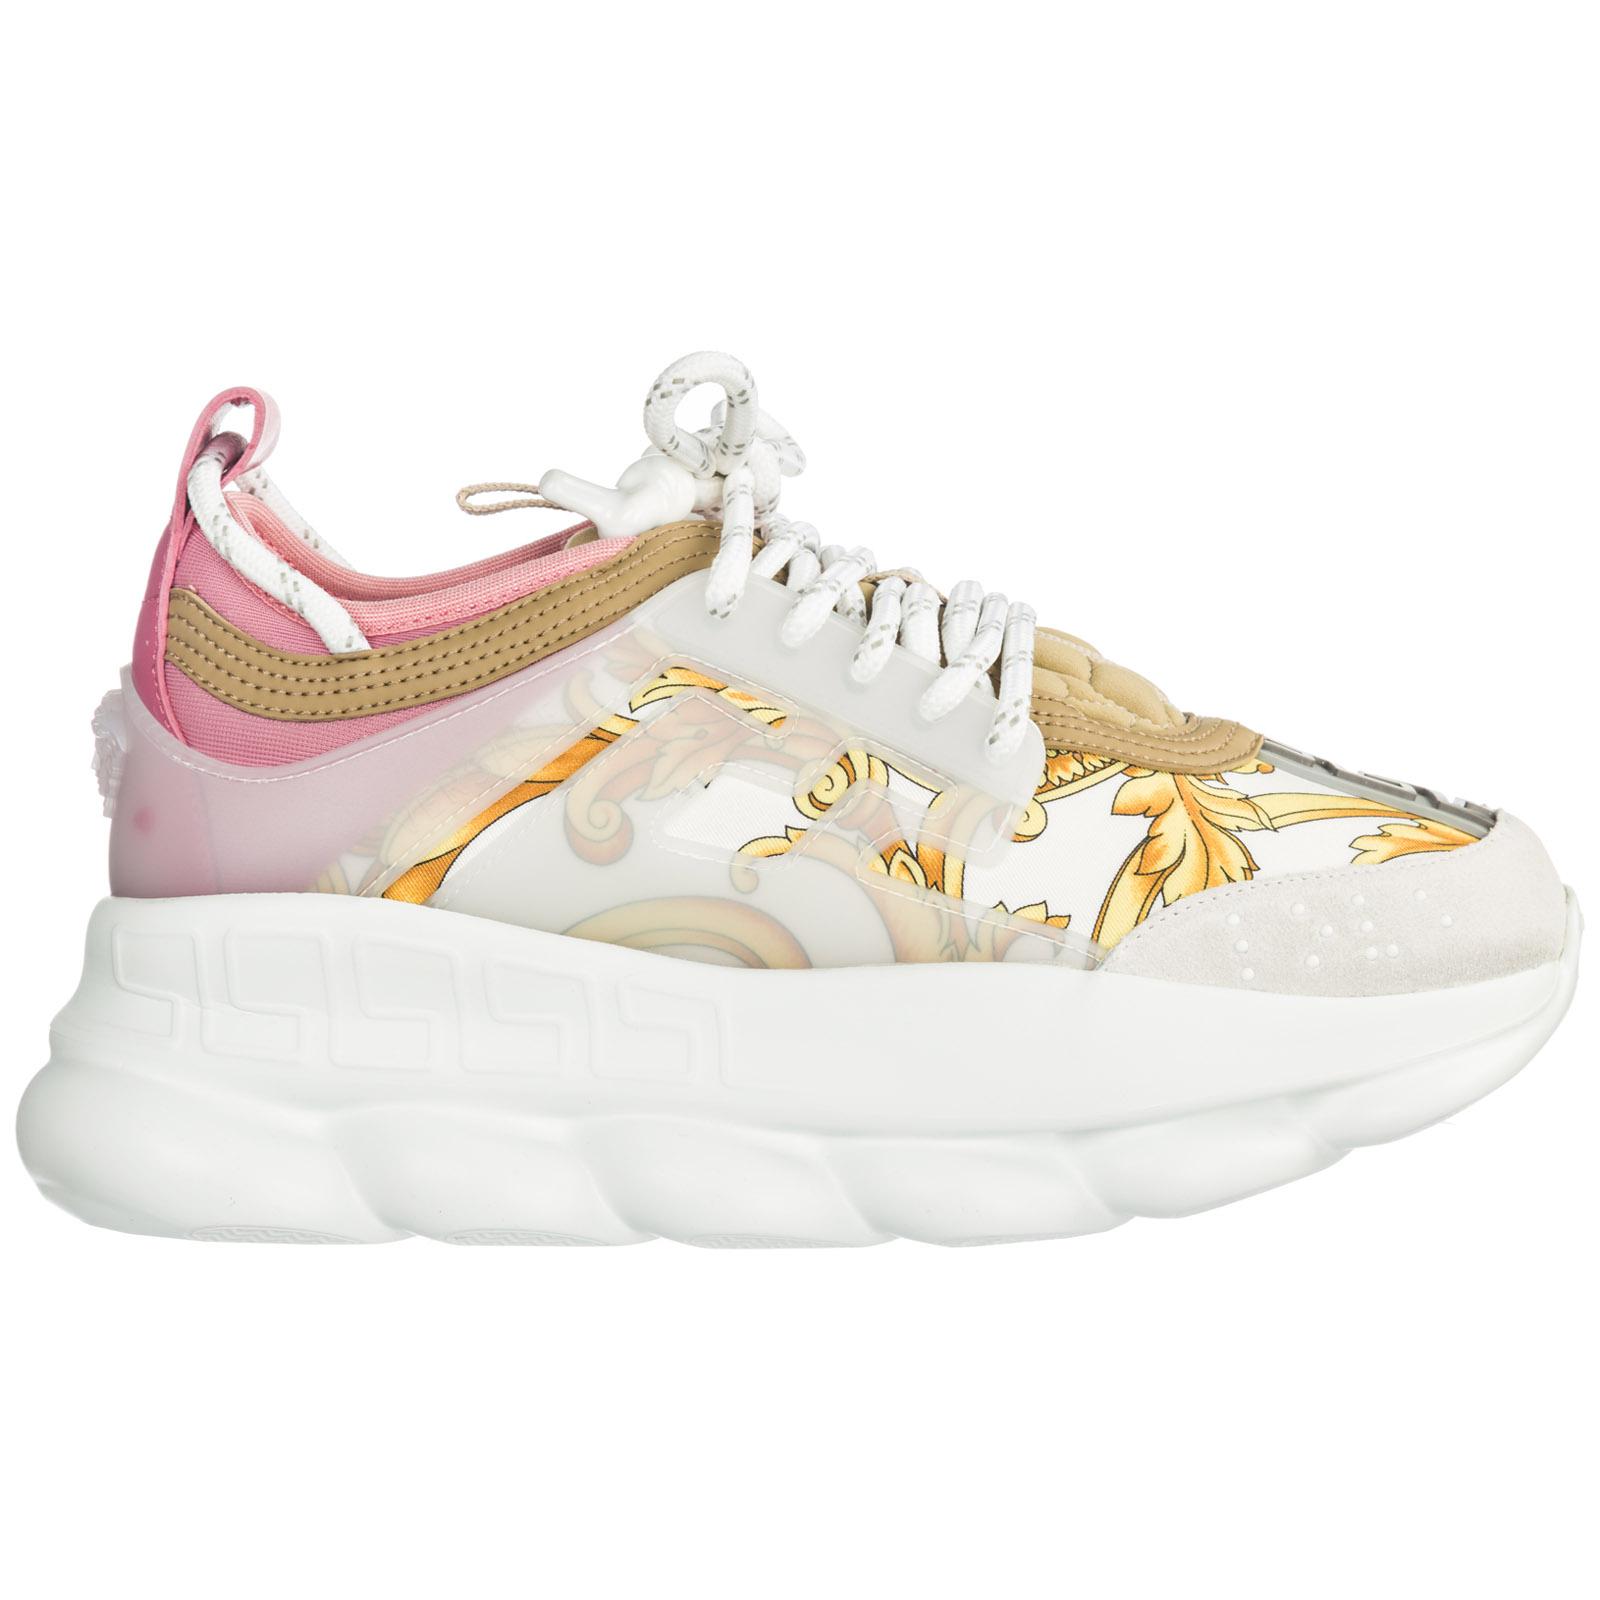 Versace Women's Shoes Trainers Sneakers Chain Reaction in Pink |